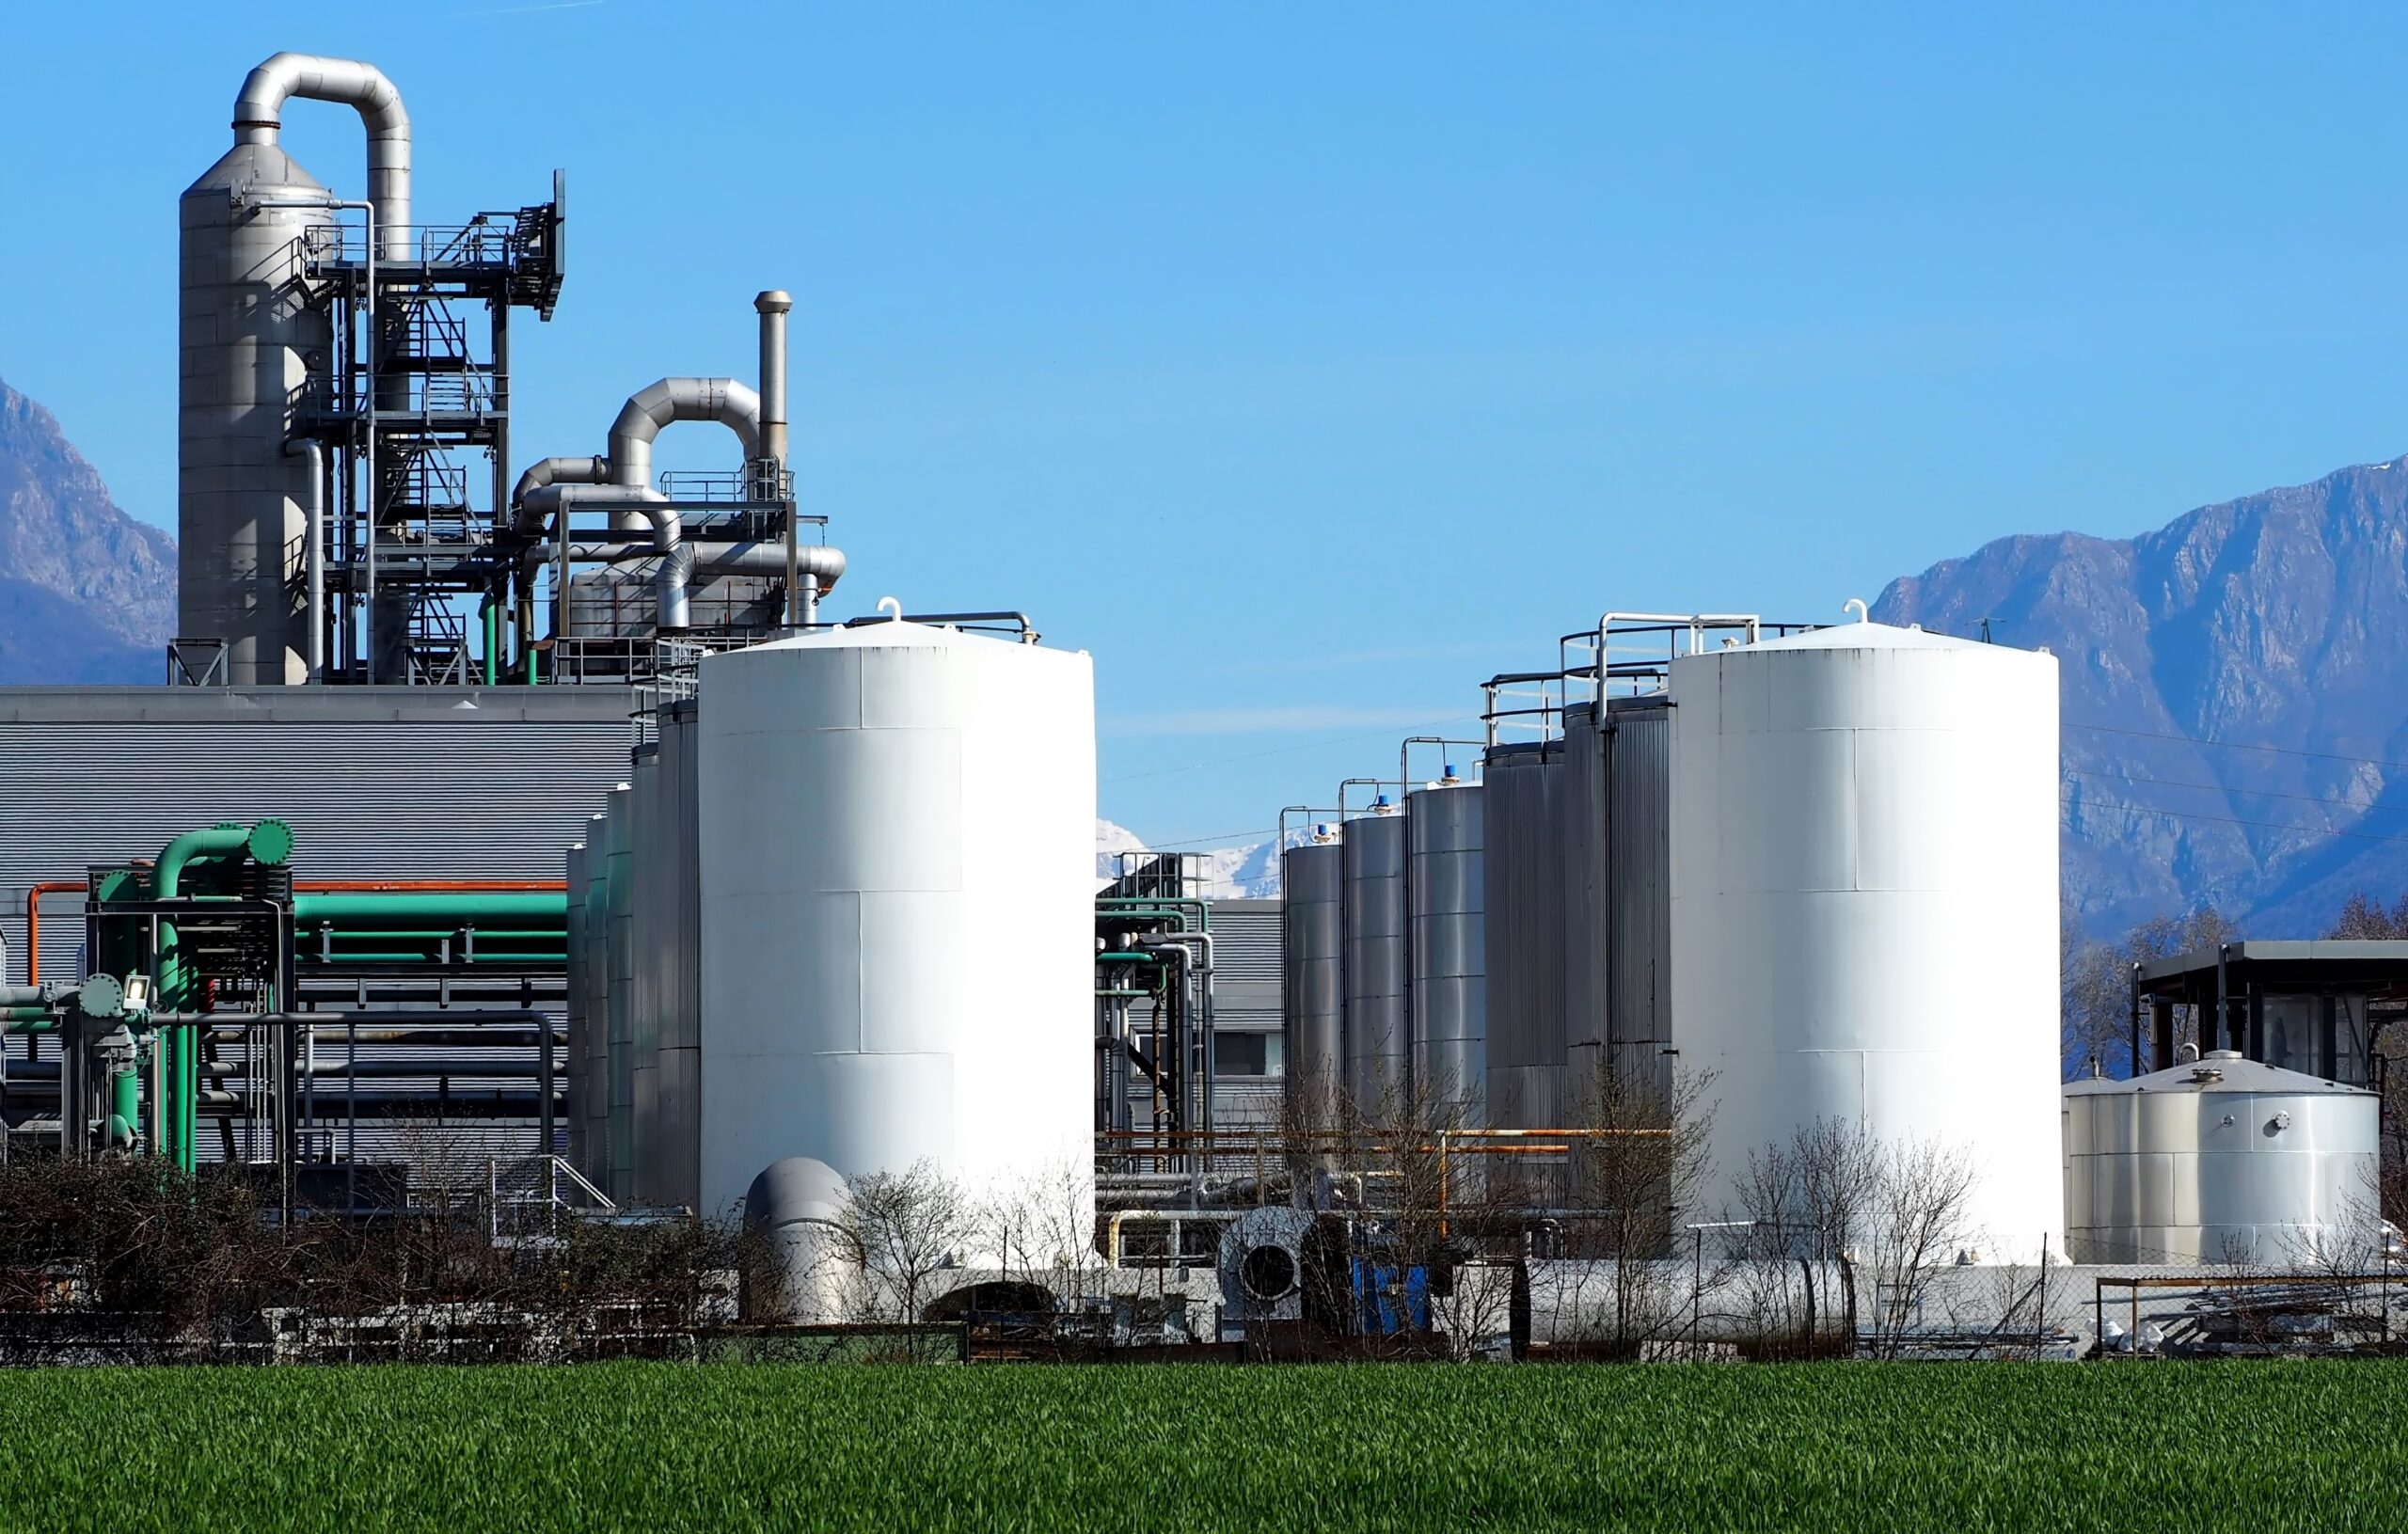 Biochemical industry plant with rows of silos in front